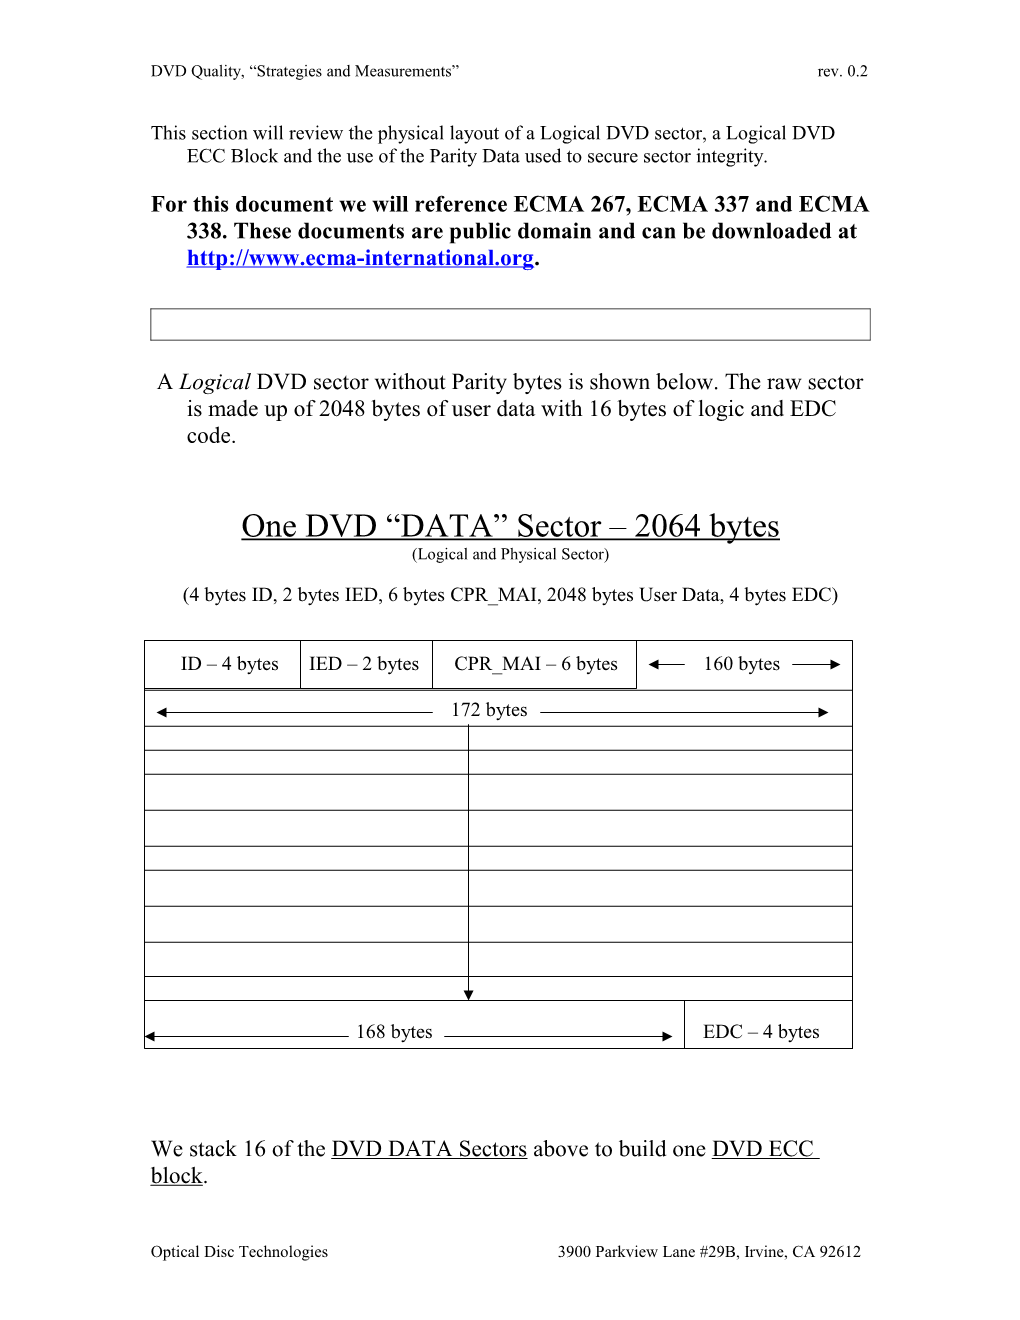 This Section Will Review the Physical Layout of a DVD Sector, a DVD ECC Block and the Use